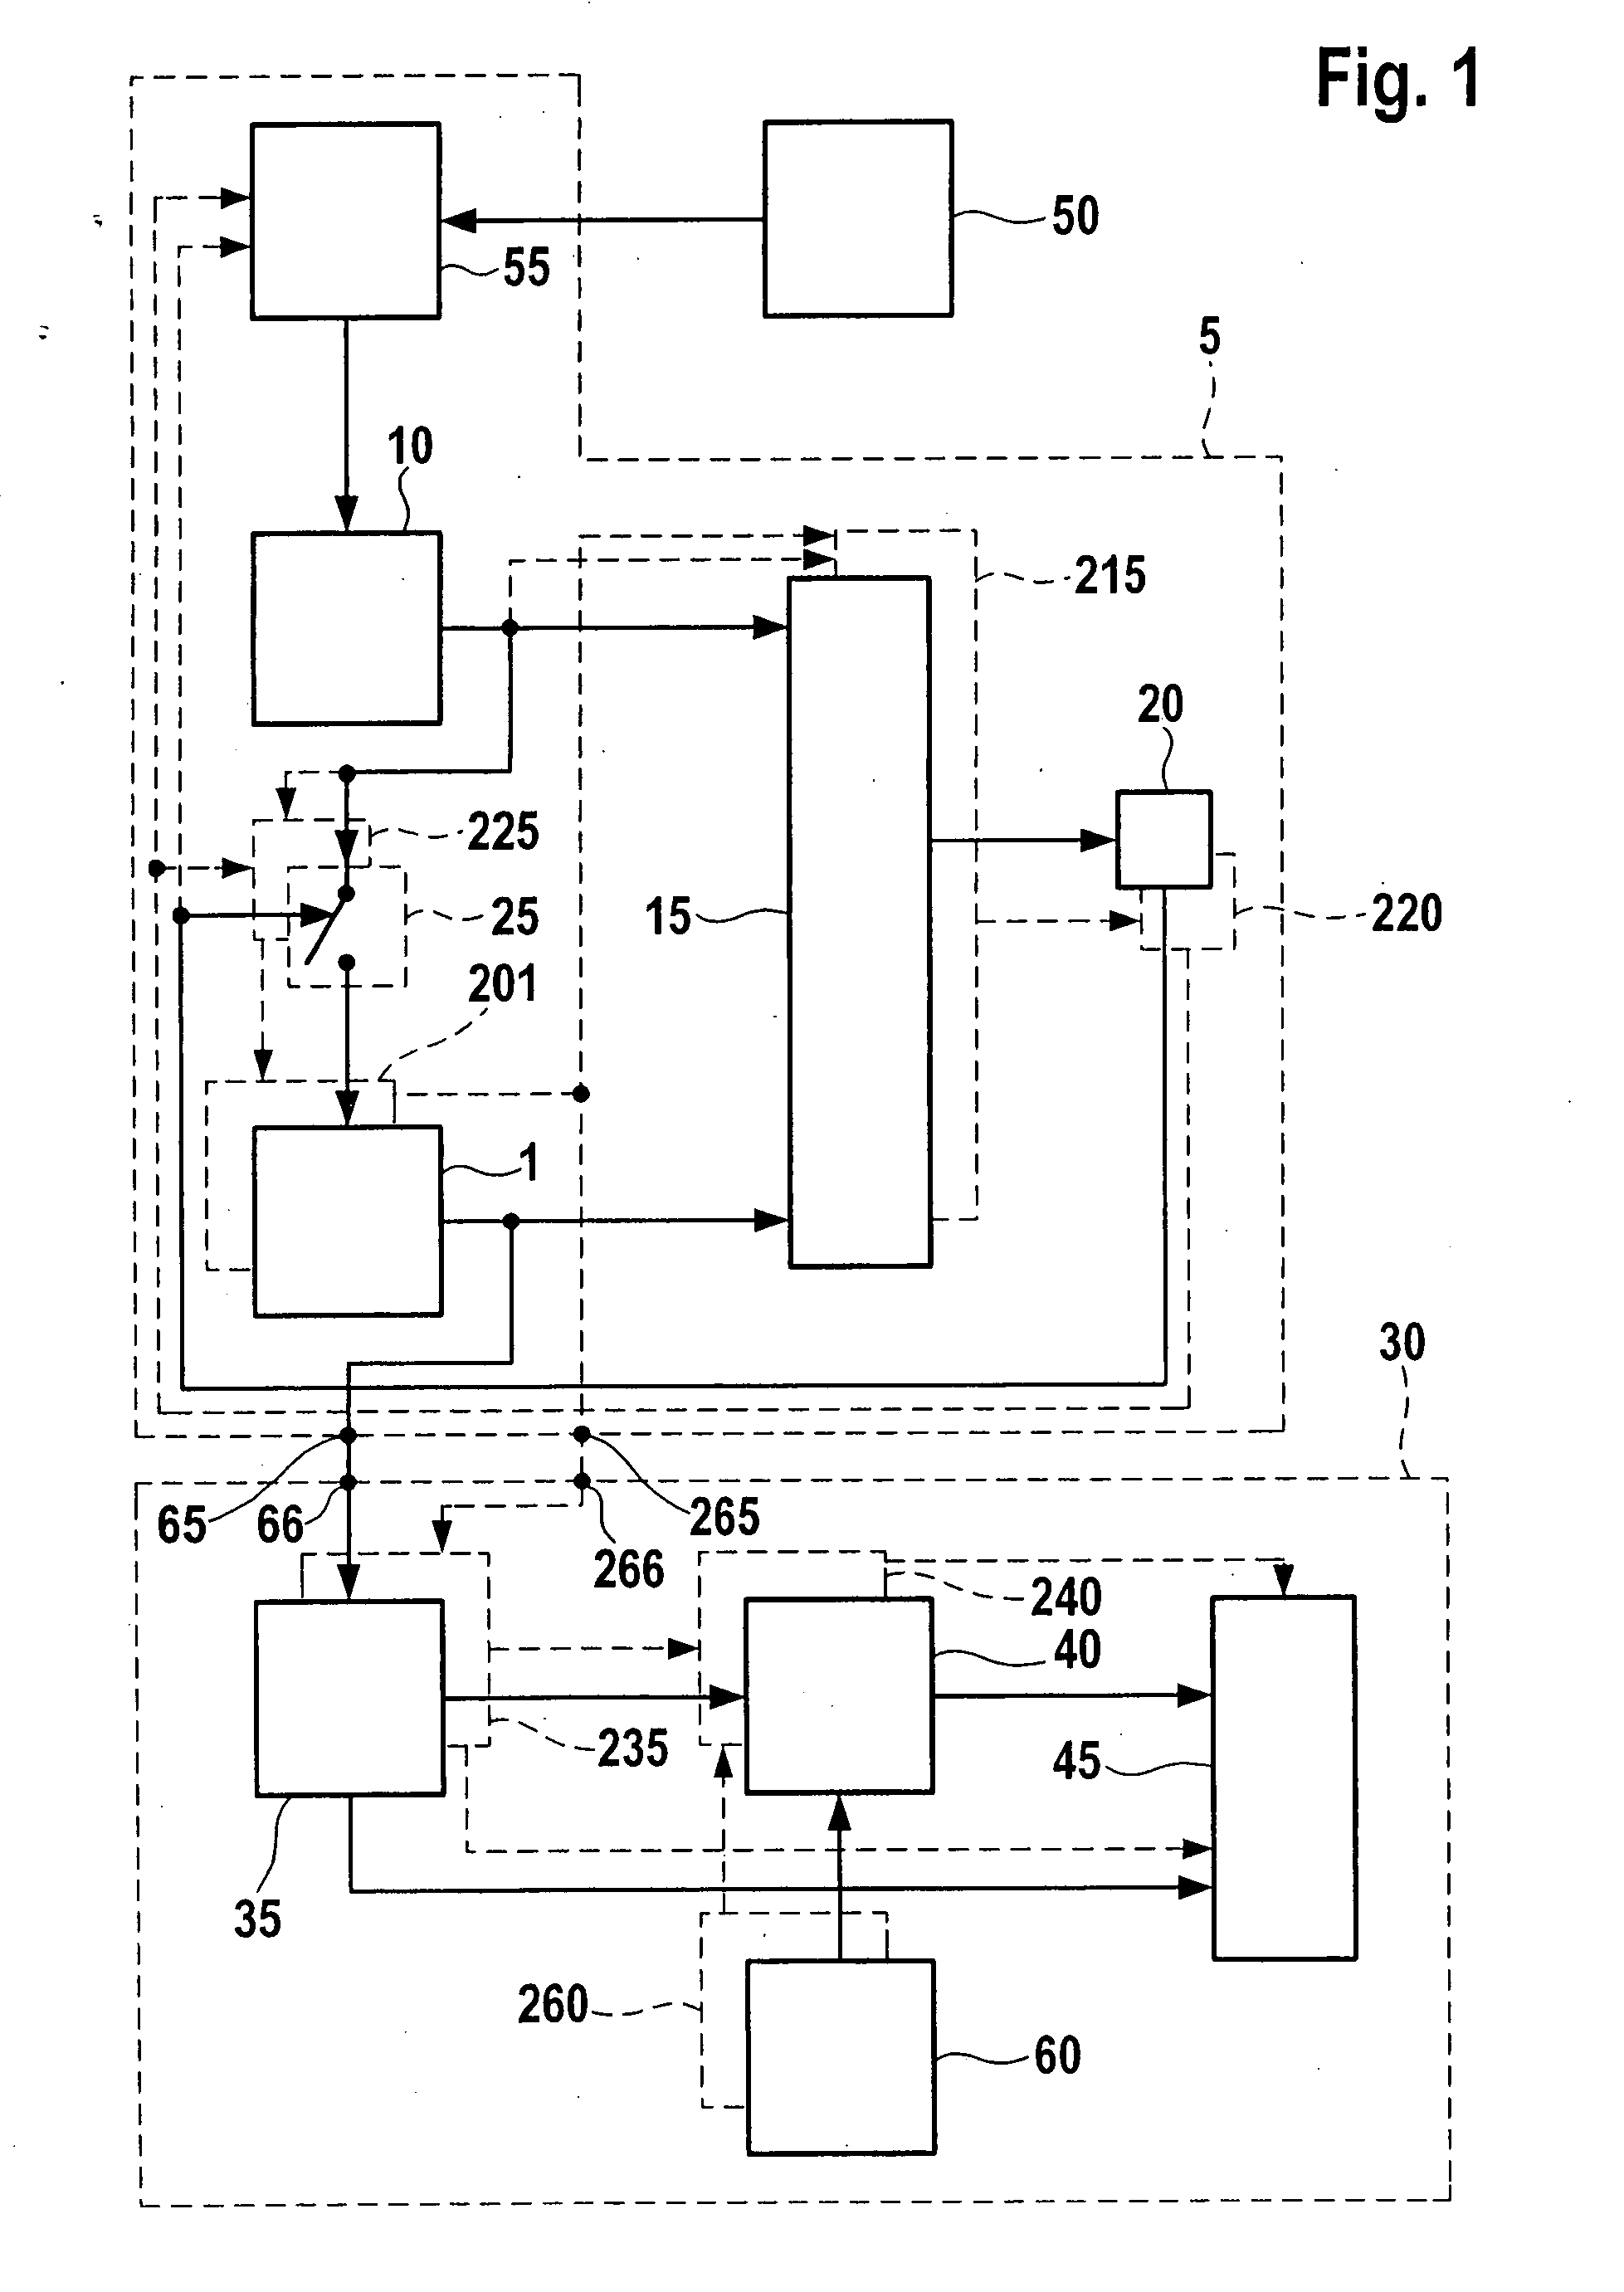 Method and device for operating a drive unit, and test device for testing a drive unit